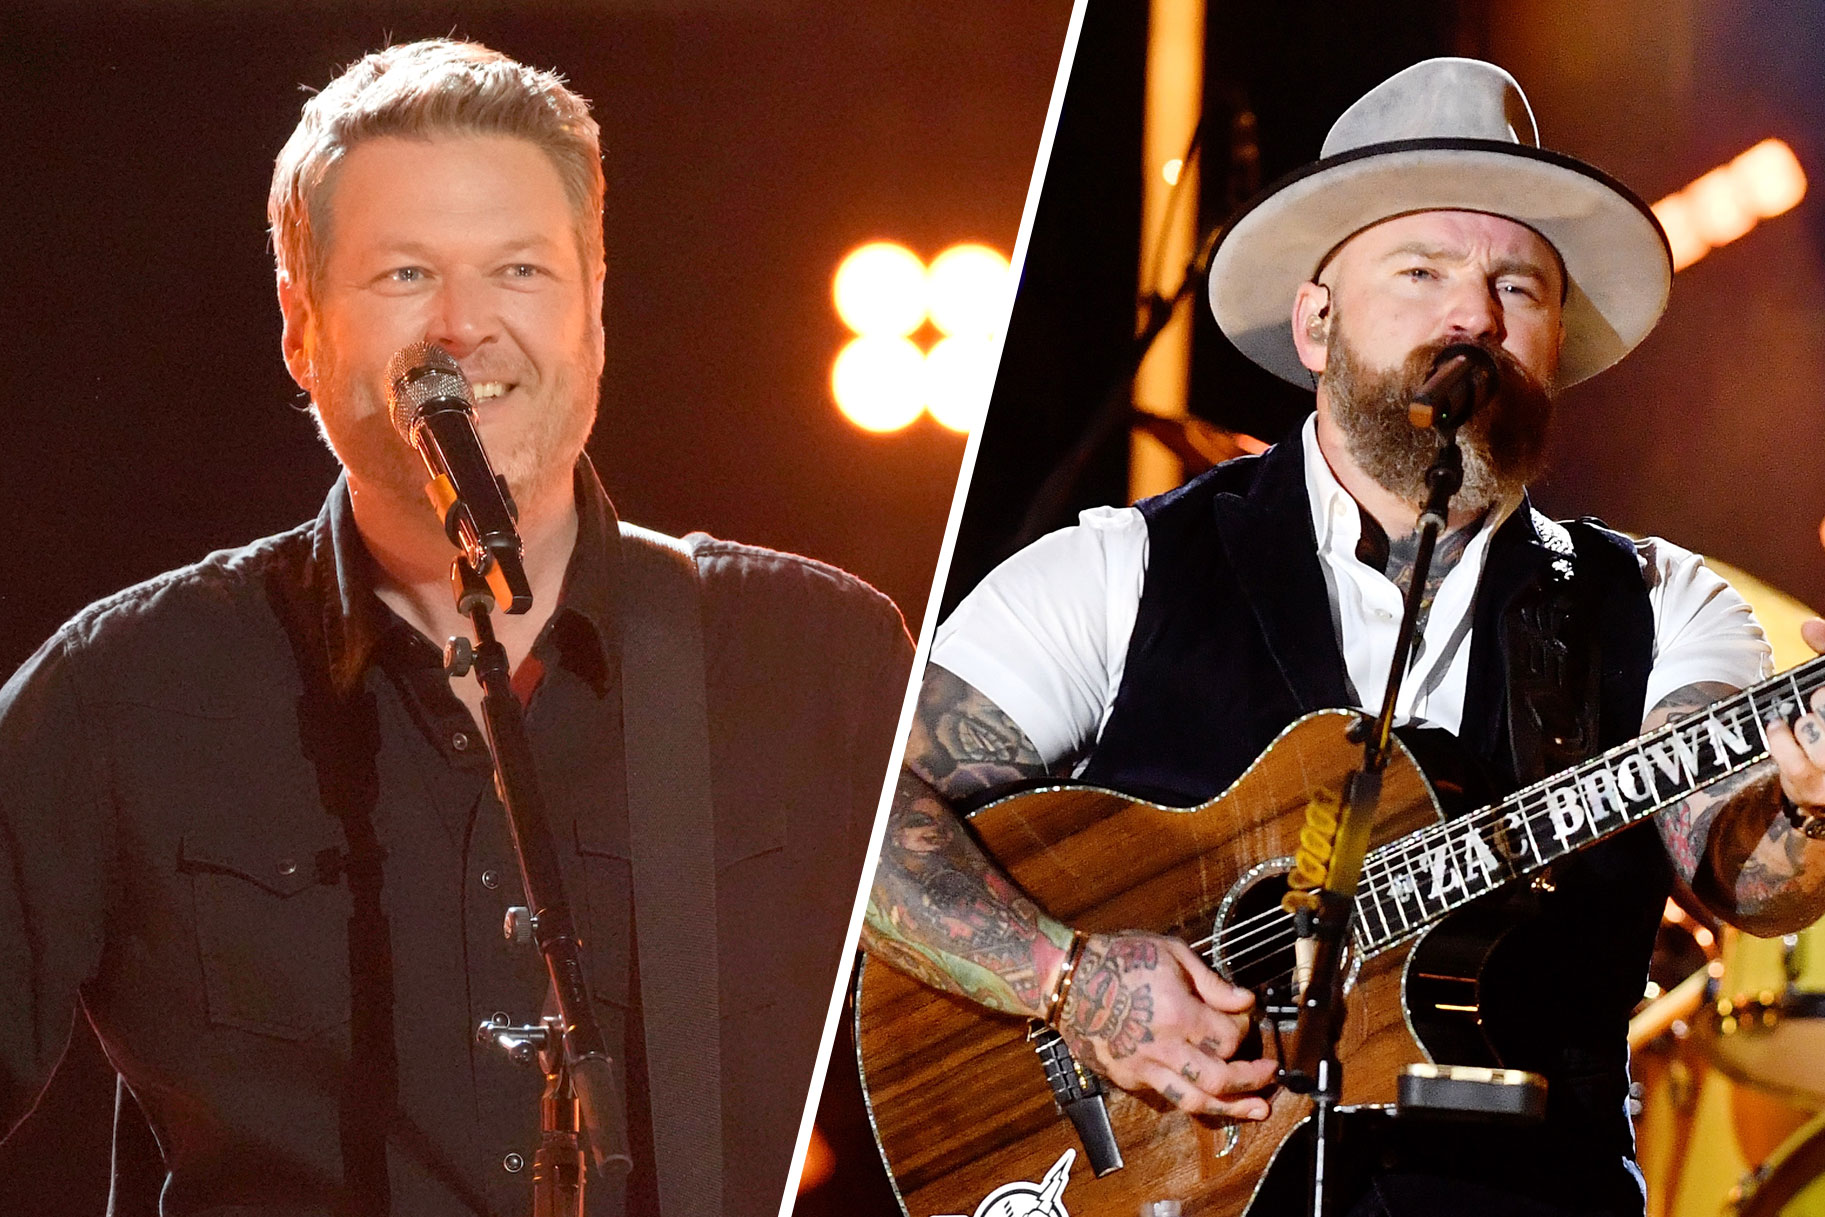 Blake Shelton performs with Zach Brown Band